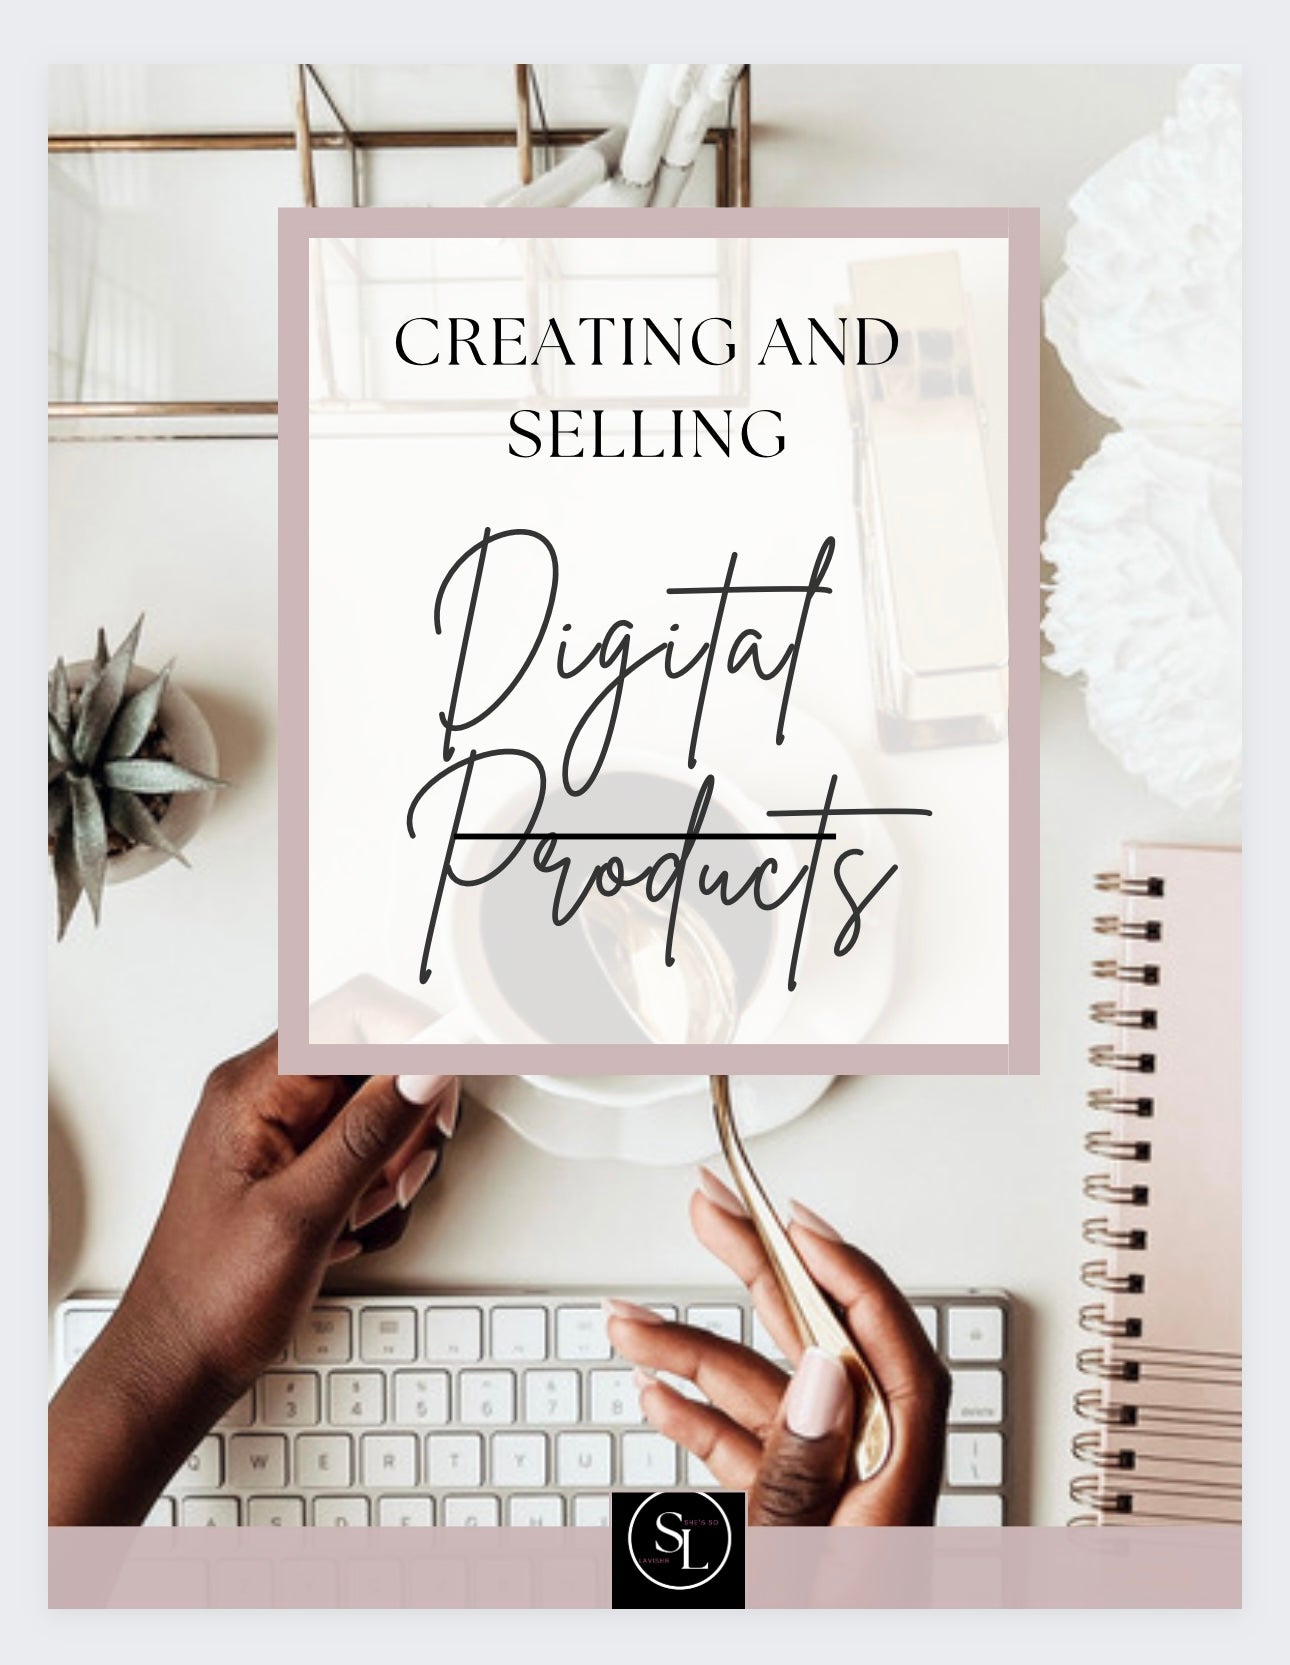 How to Sell and Create Digital Products - She's So Lavishh